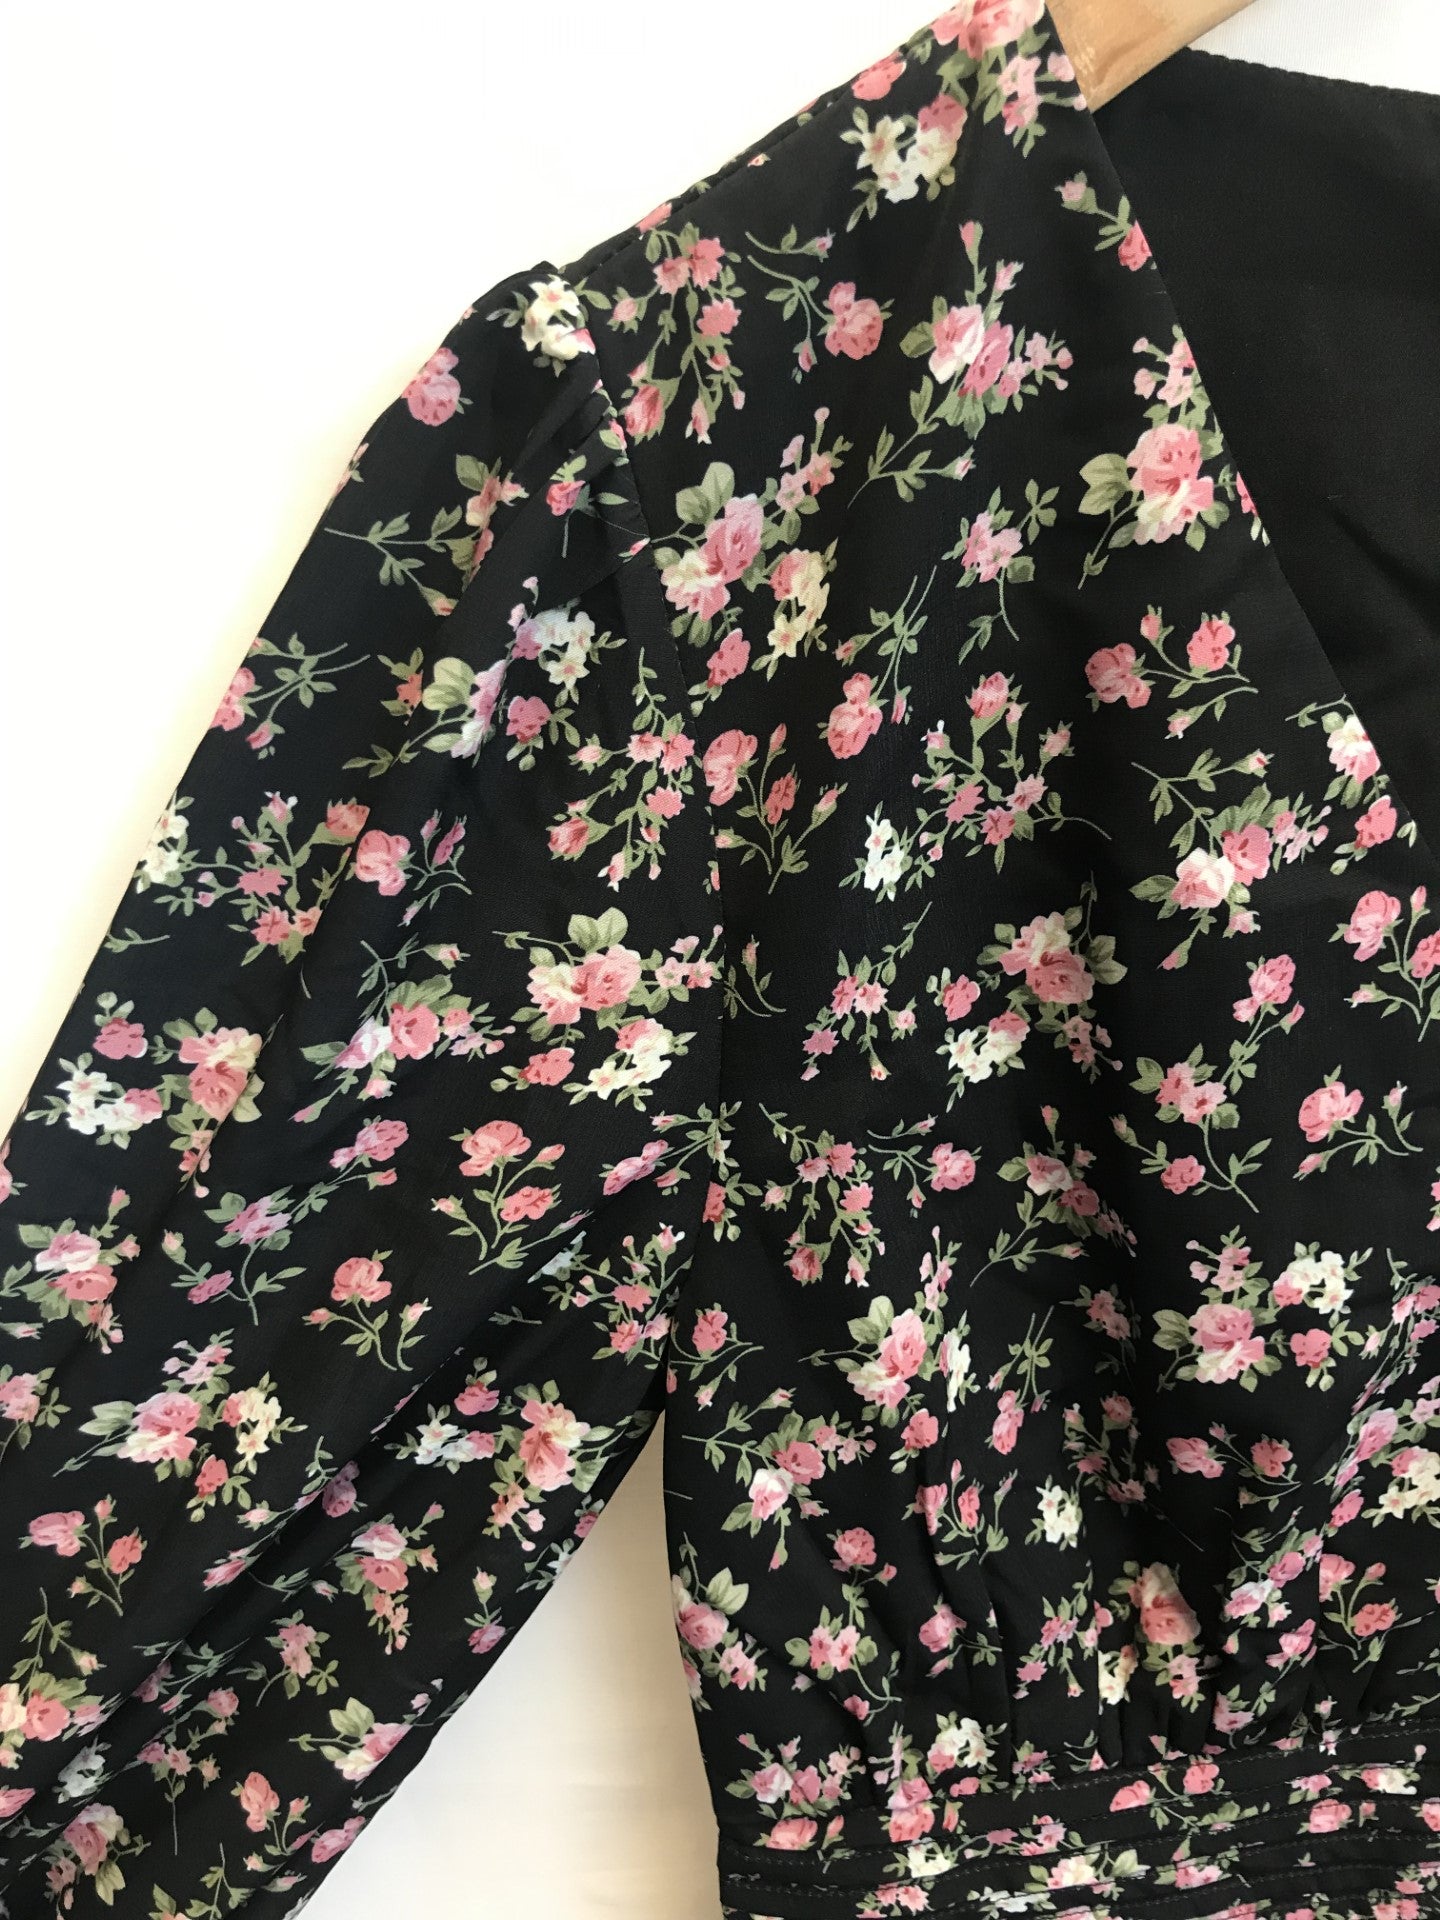 TwoSisters Black and Pink Long Sleeve Floral Dress, Size UK 8, BNWT